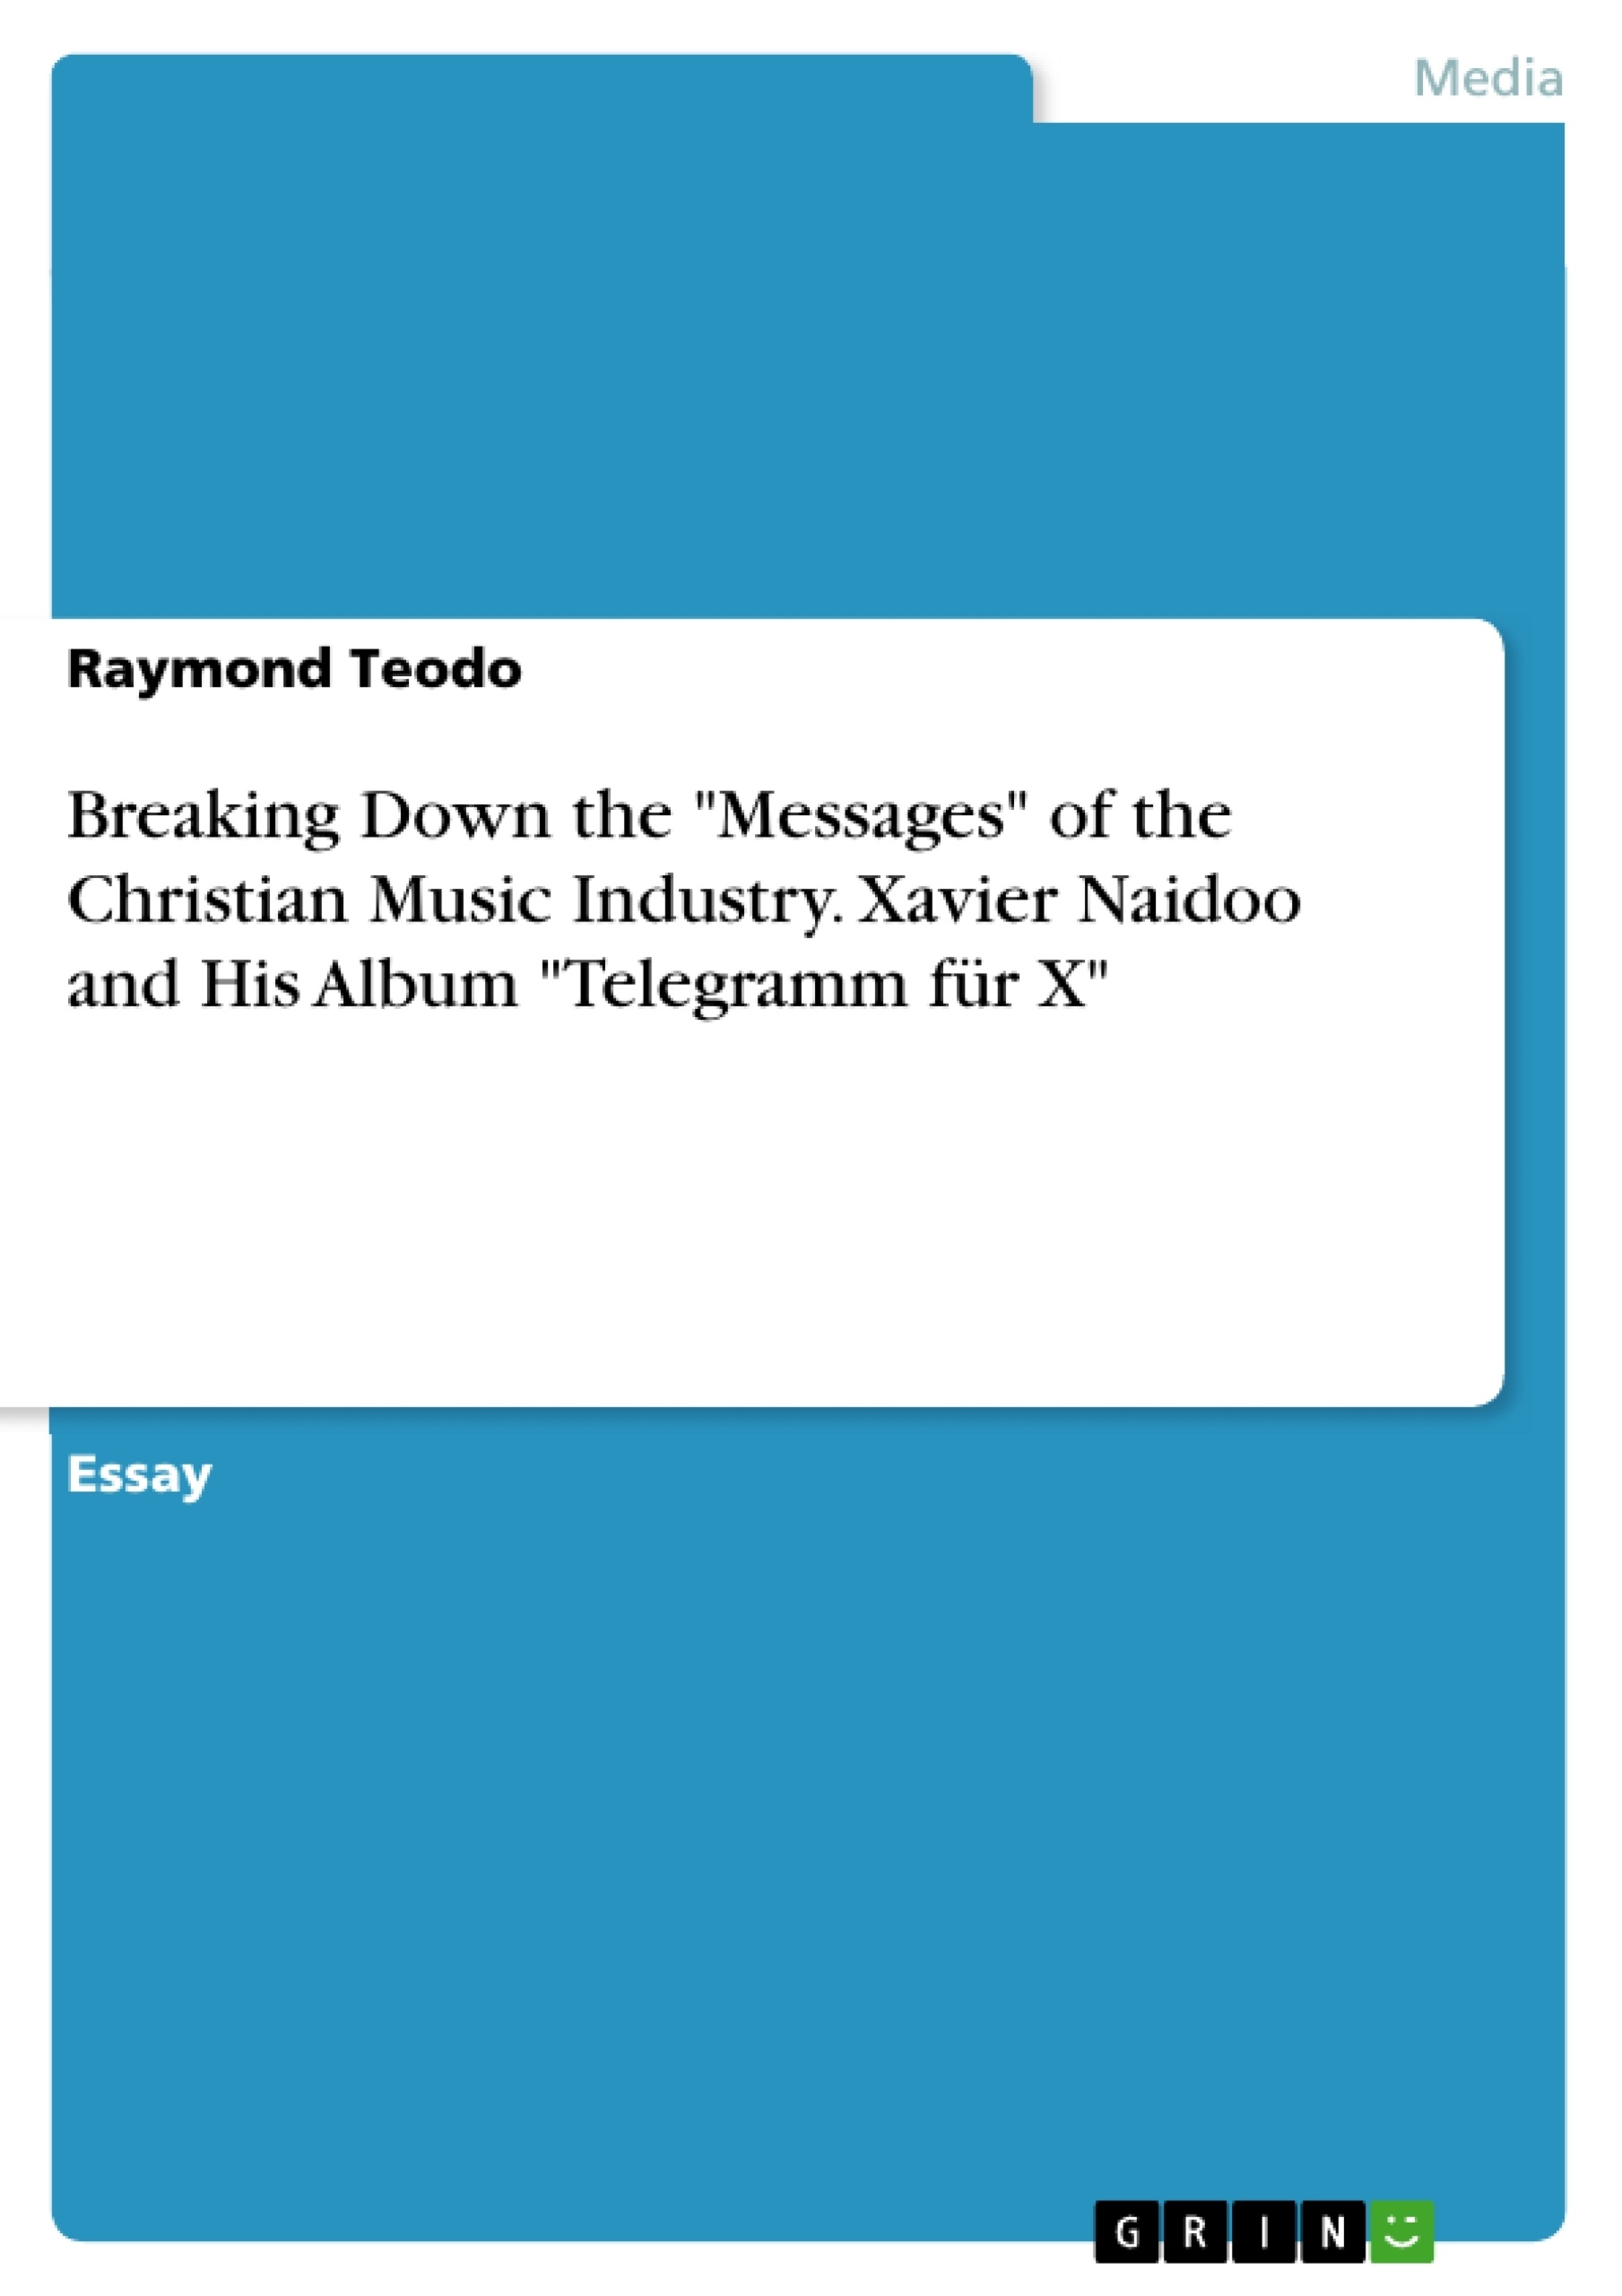 Titre: Breaking Down the "Messages" of the Christian Music Industry. Xavier Naidoo and His Album "Telegramm für X"